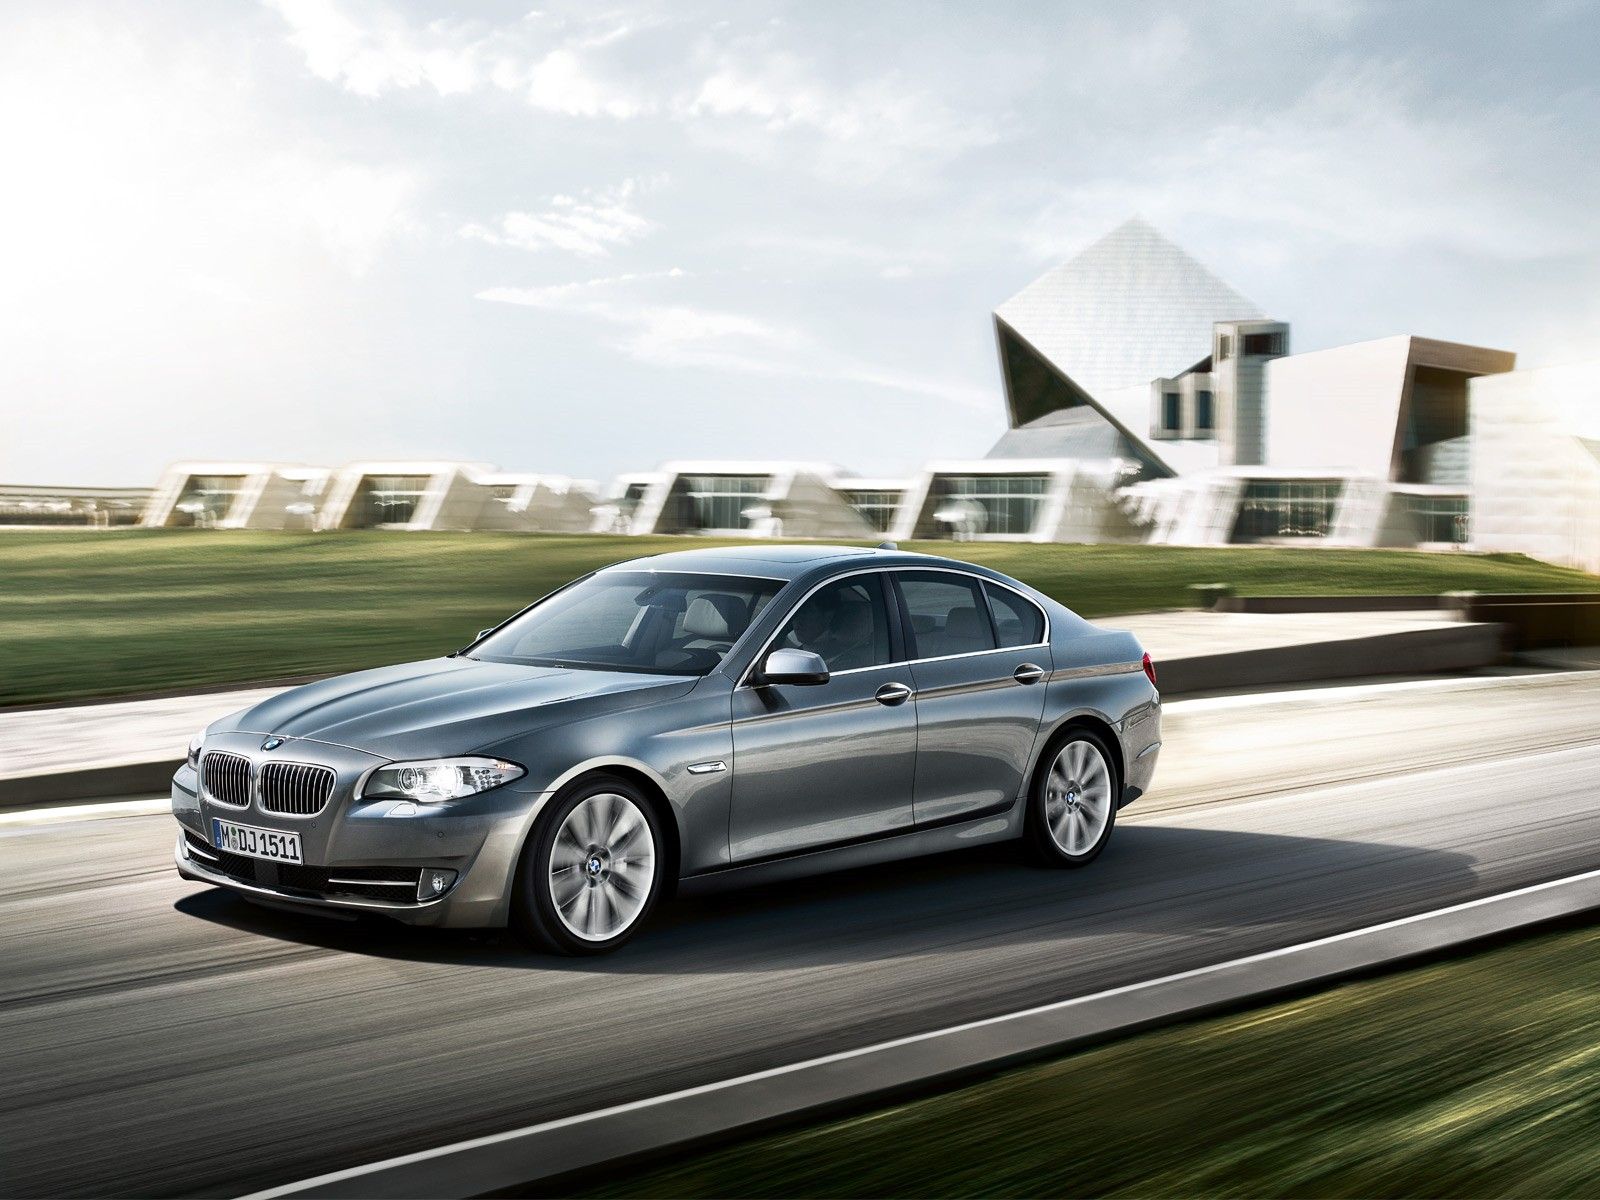 BMW picked up Best Executive Car crown for BMW 5 Series